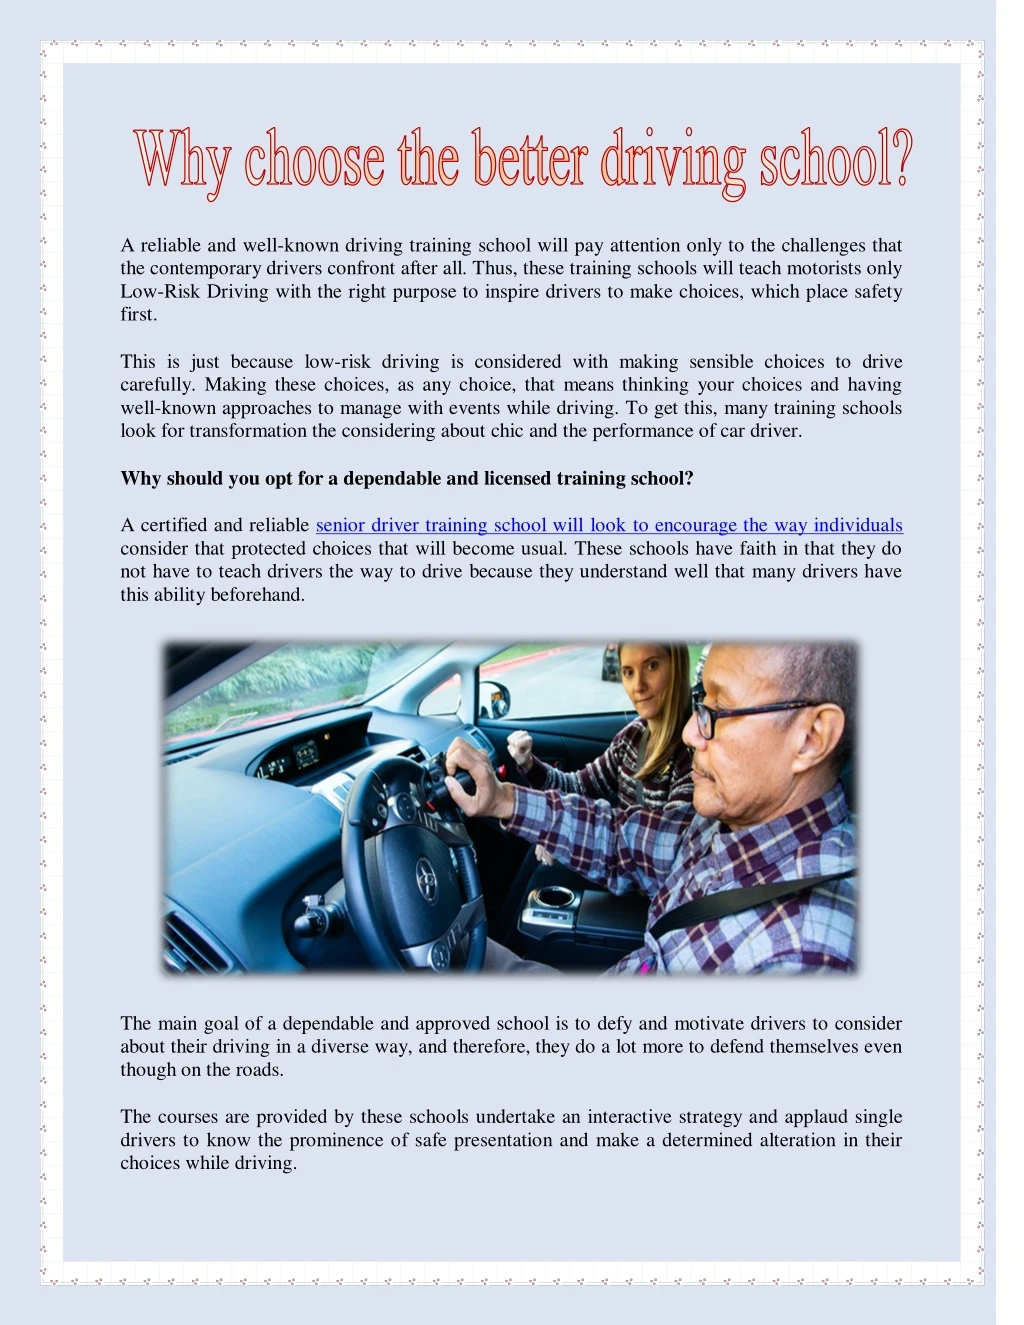 a reliable and well known driving training school